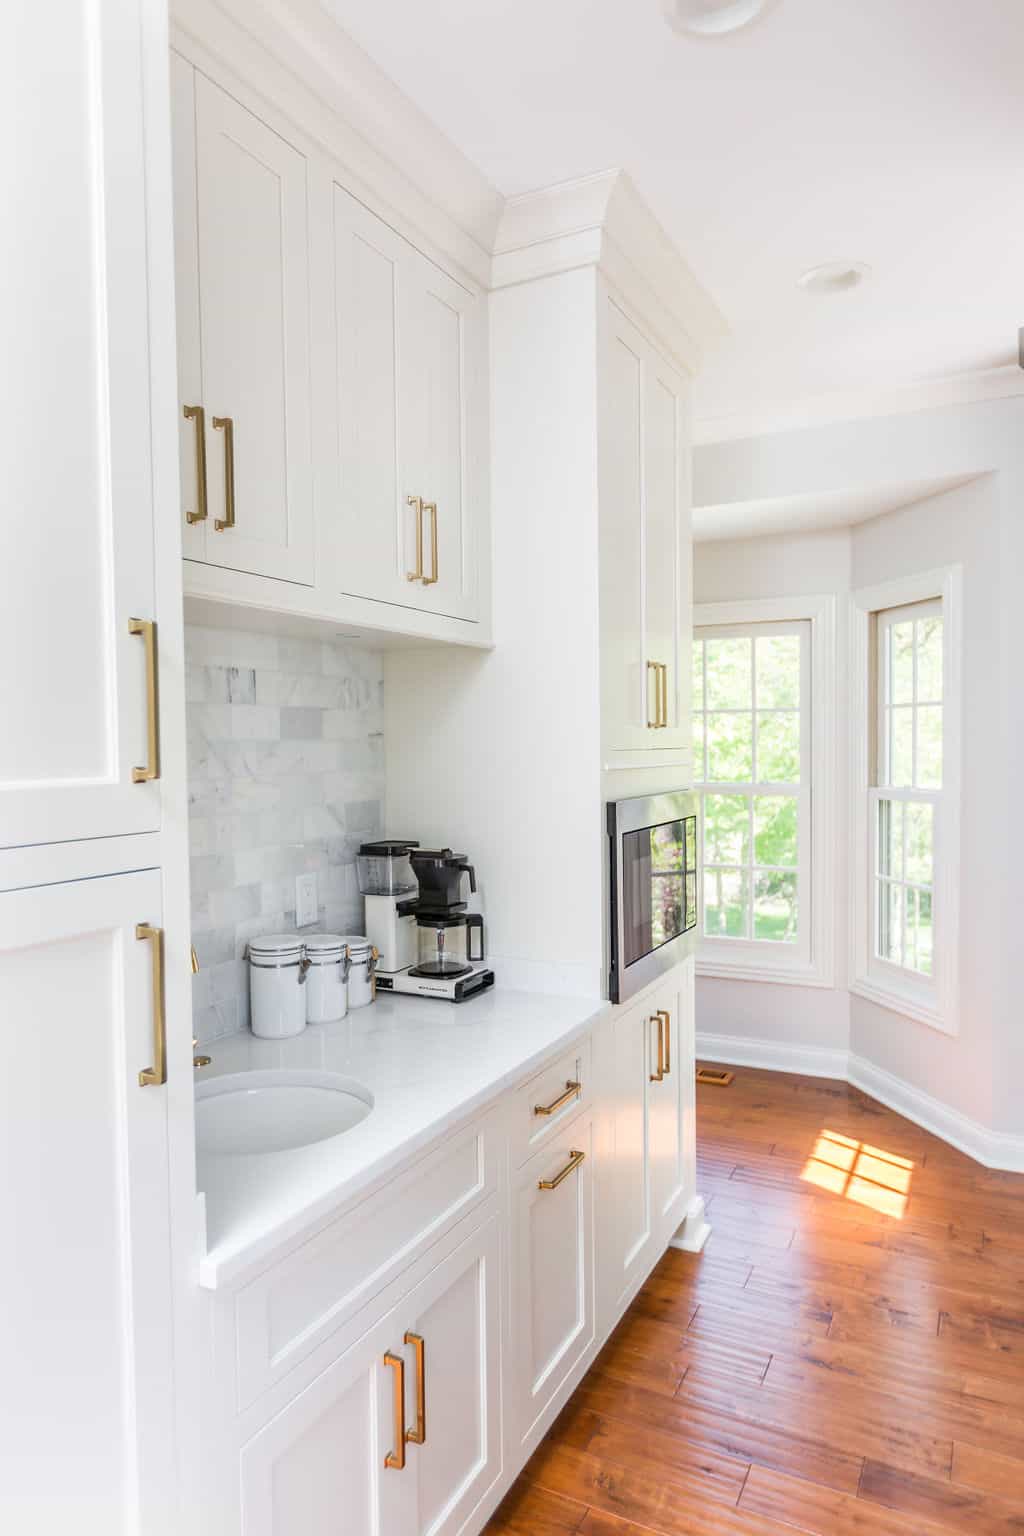 Nicholas Design Build | Remodeling a kitchen with white cabinets and hardwood floors.